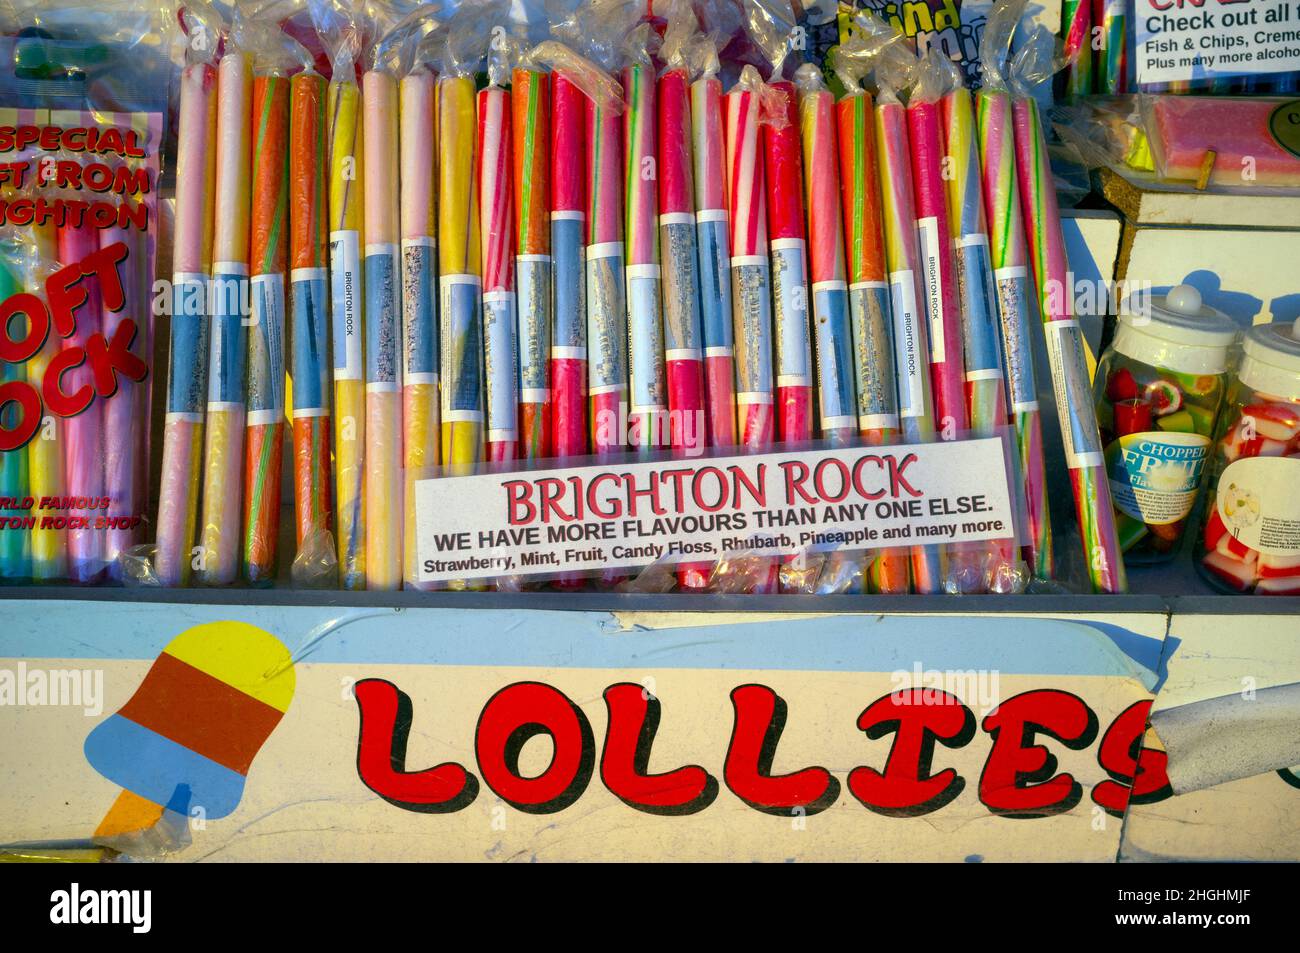 Brighton Rock for sale in a seafront sweet shop Stock Photo